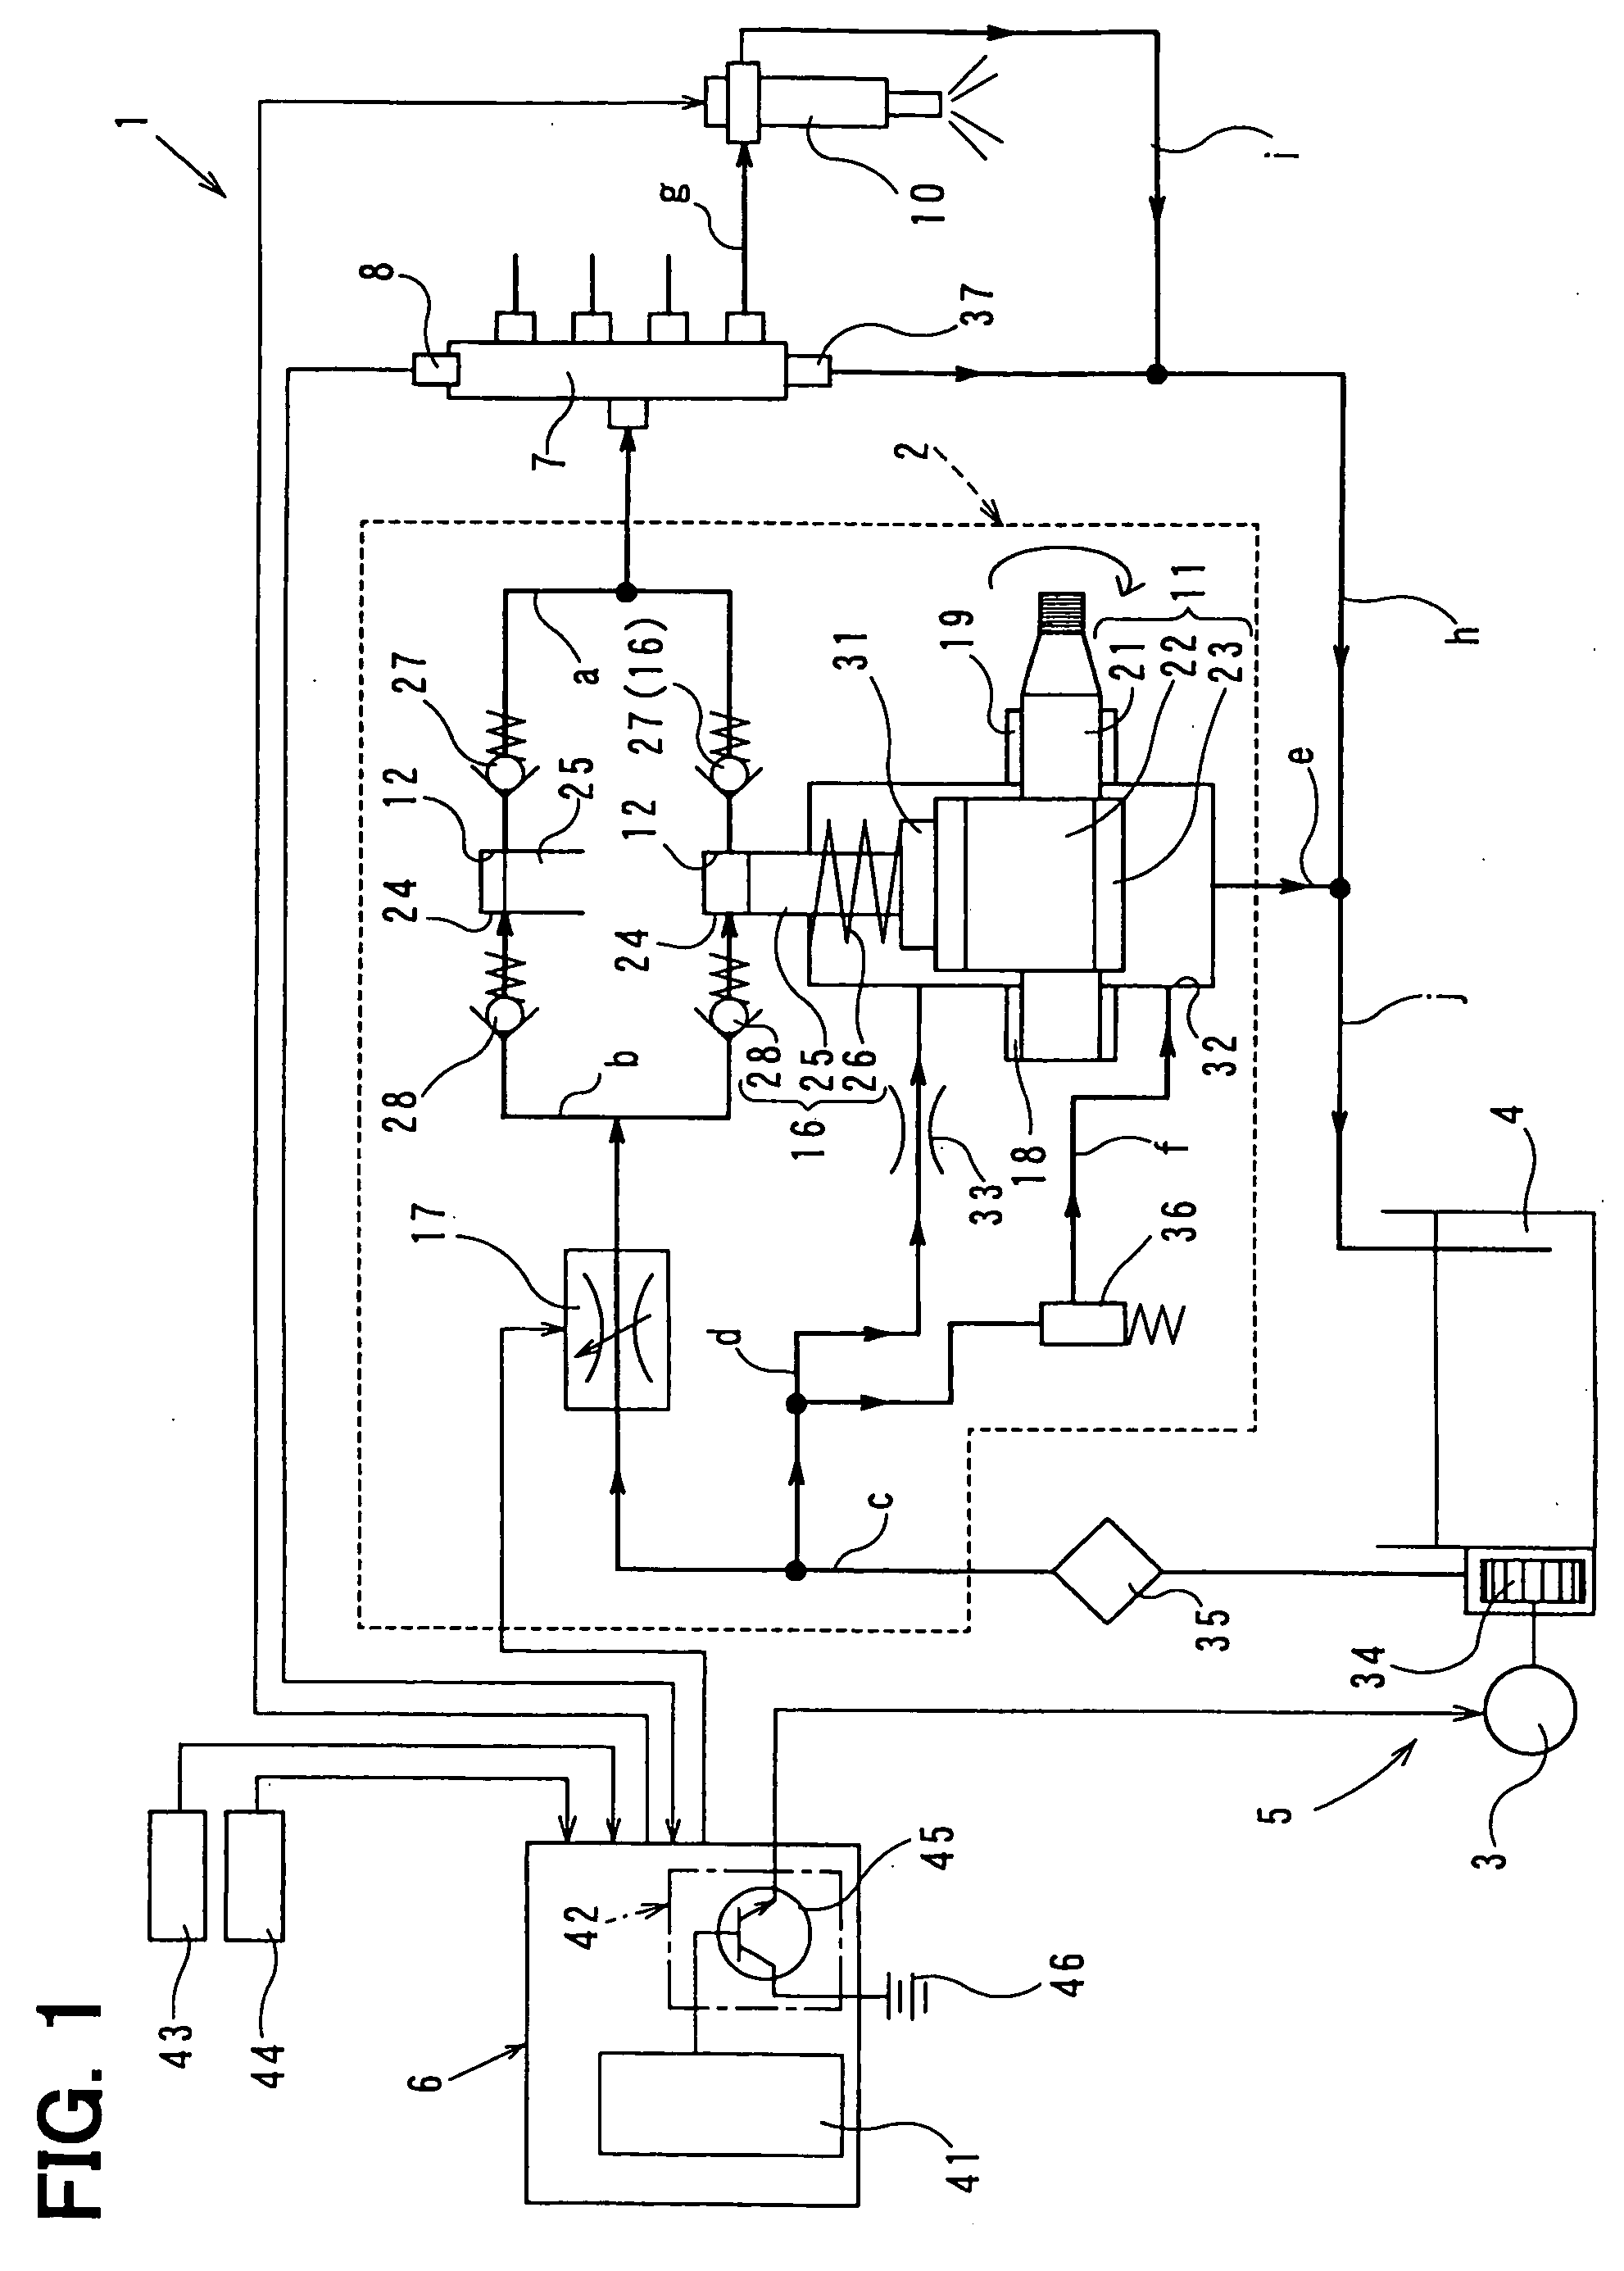 Fuel injection system having electric low-pressure pump